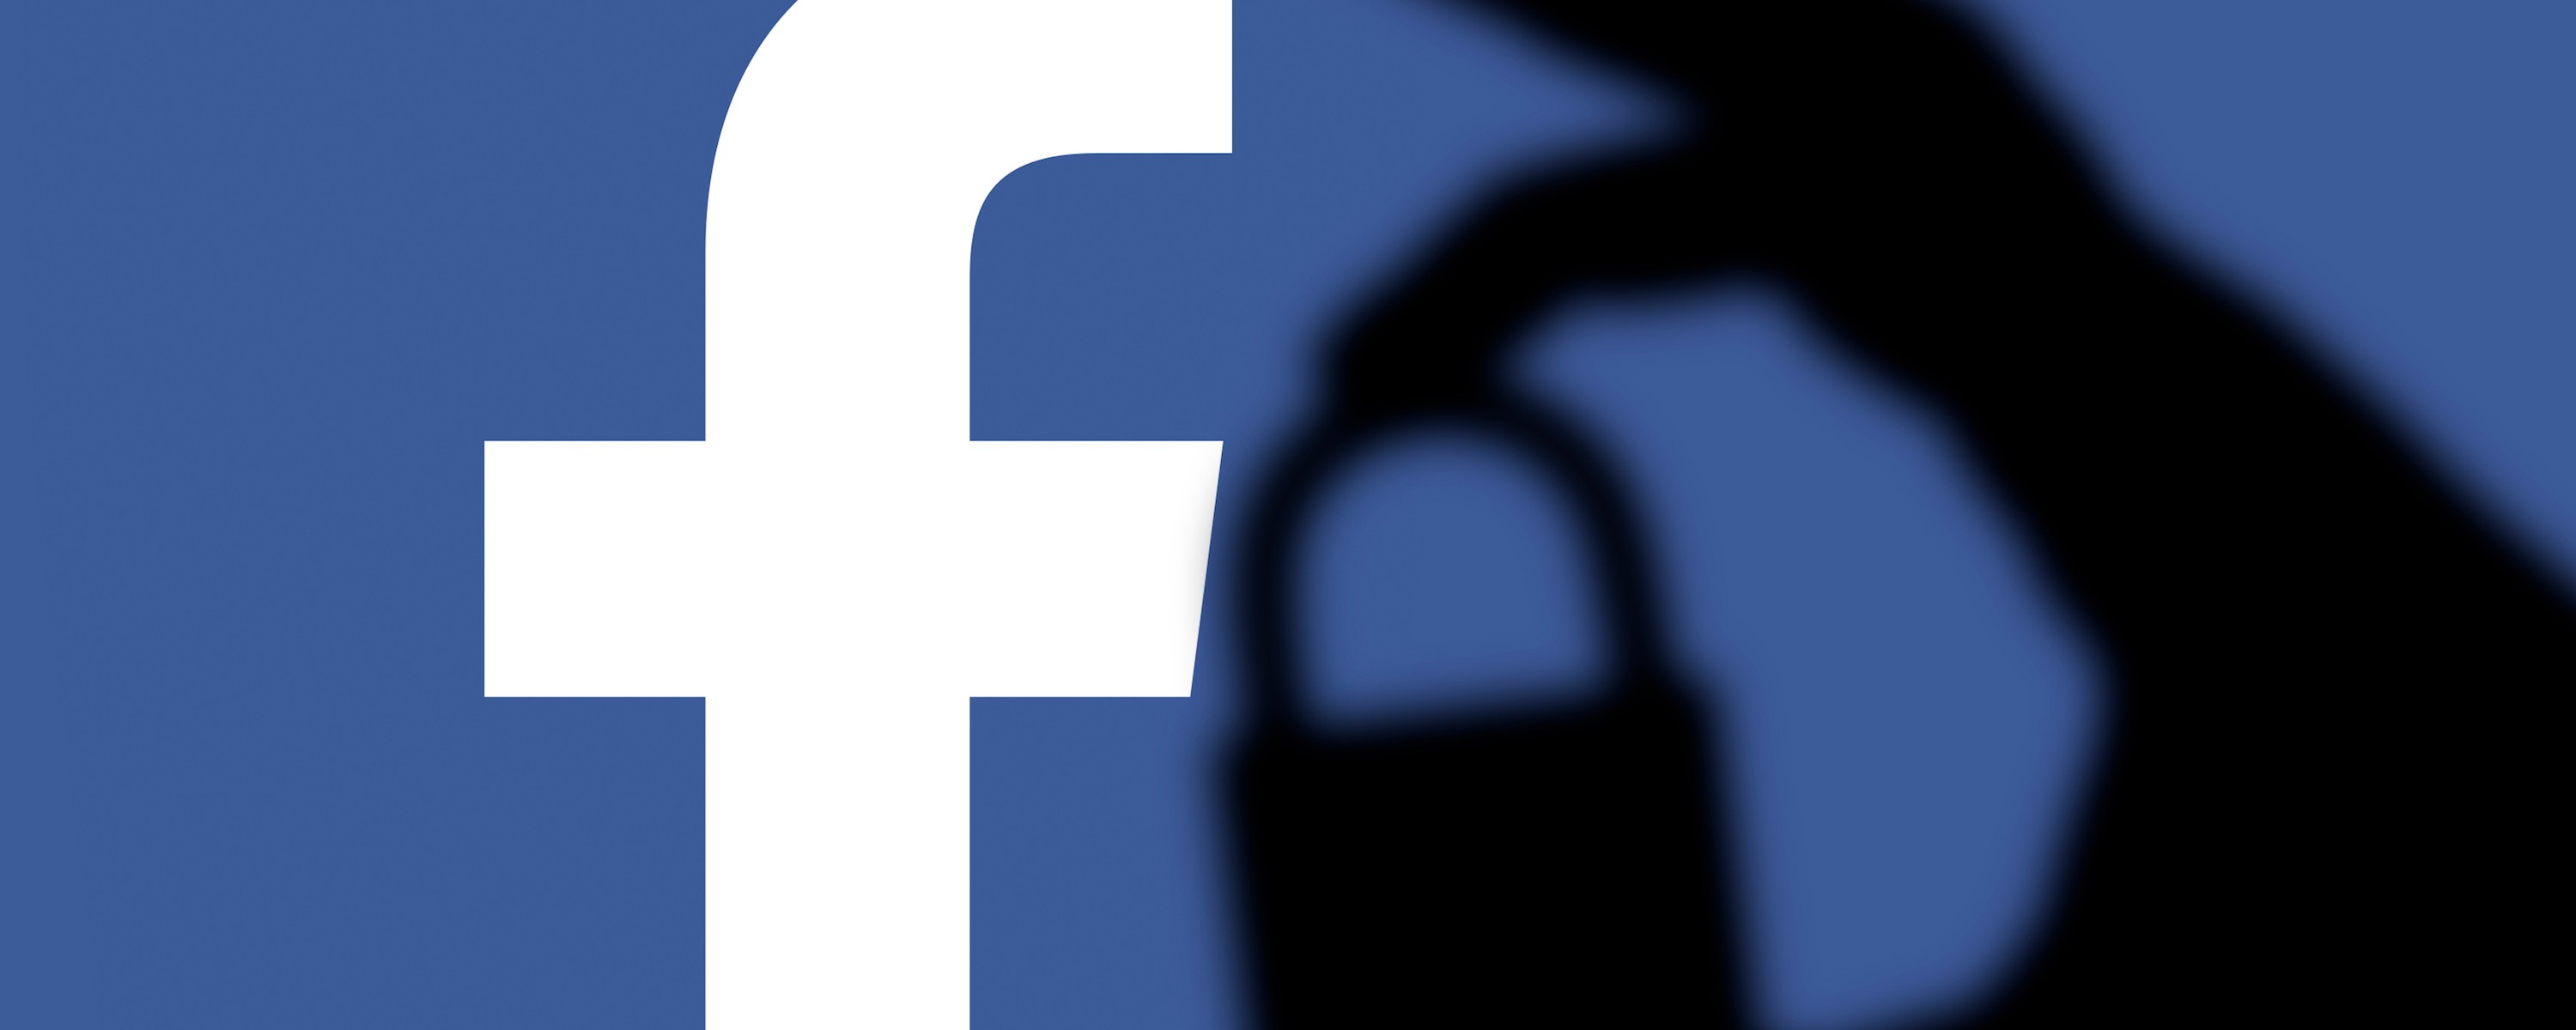 The Motherboard Guide To Using Facebook Safely